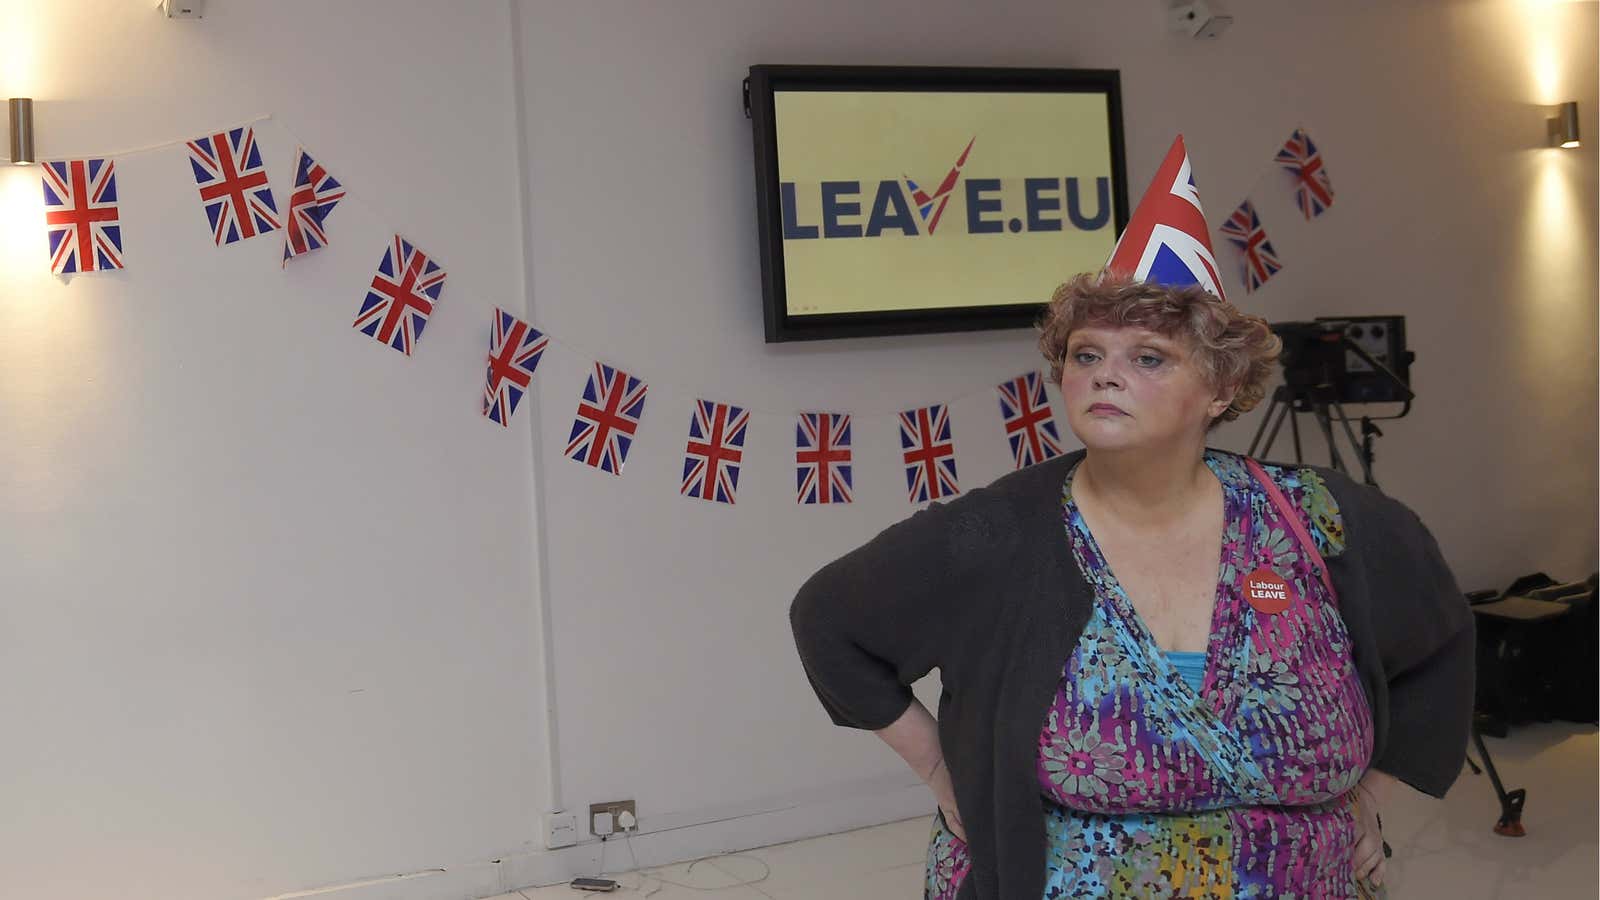 A Leave.eu supporter wears a union flag paper hat during the Brexit vote in 2016.